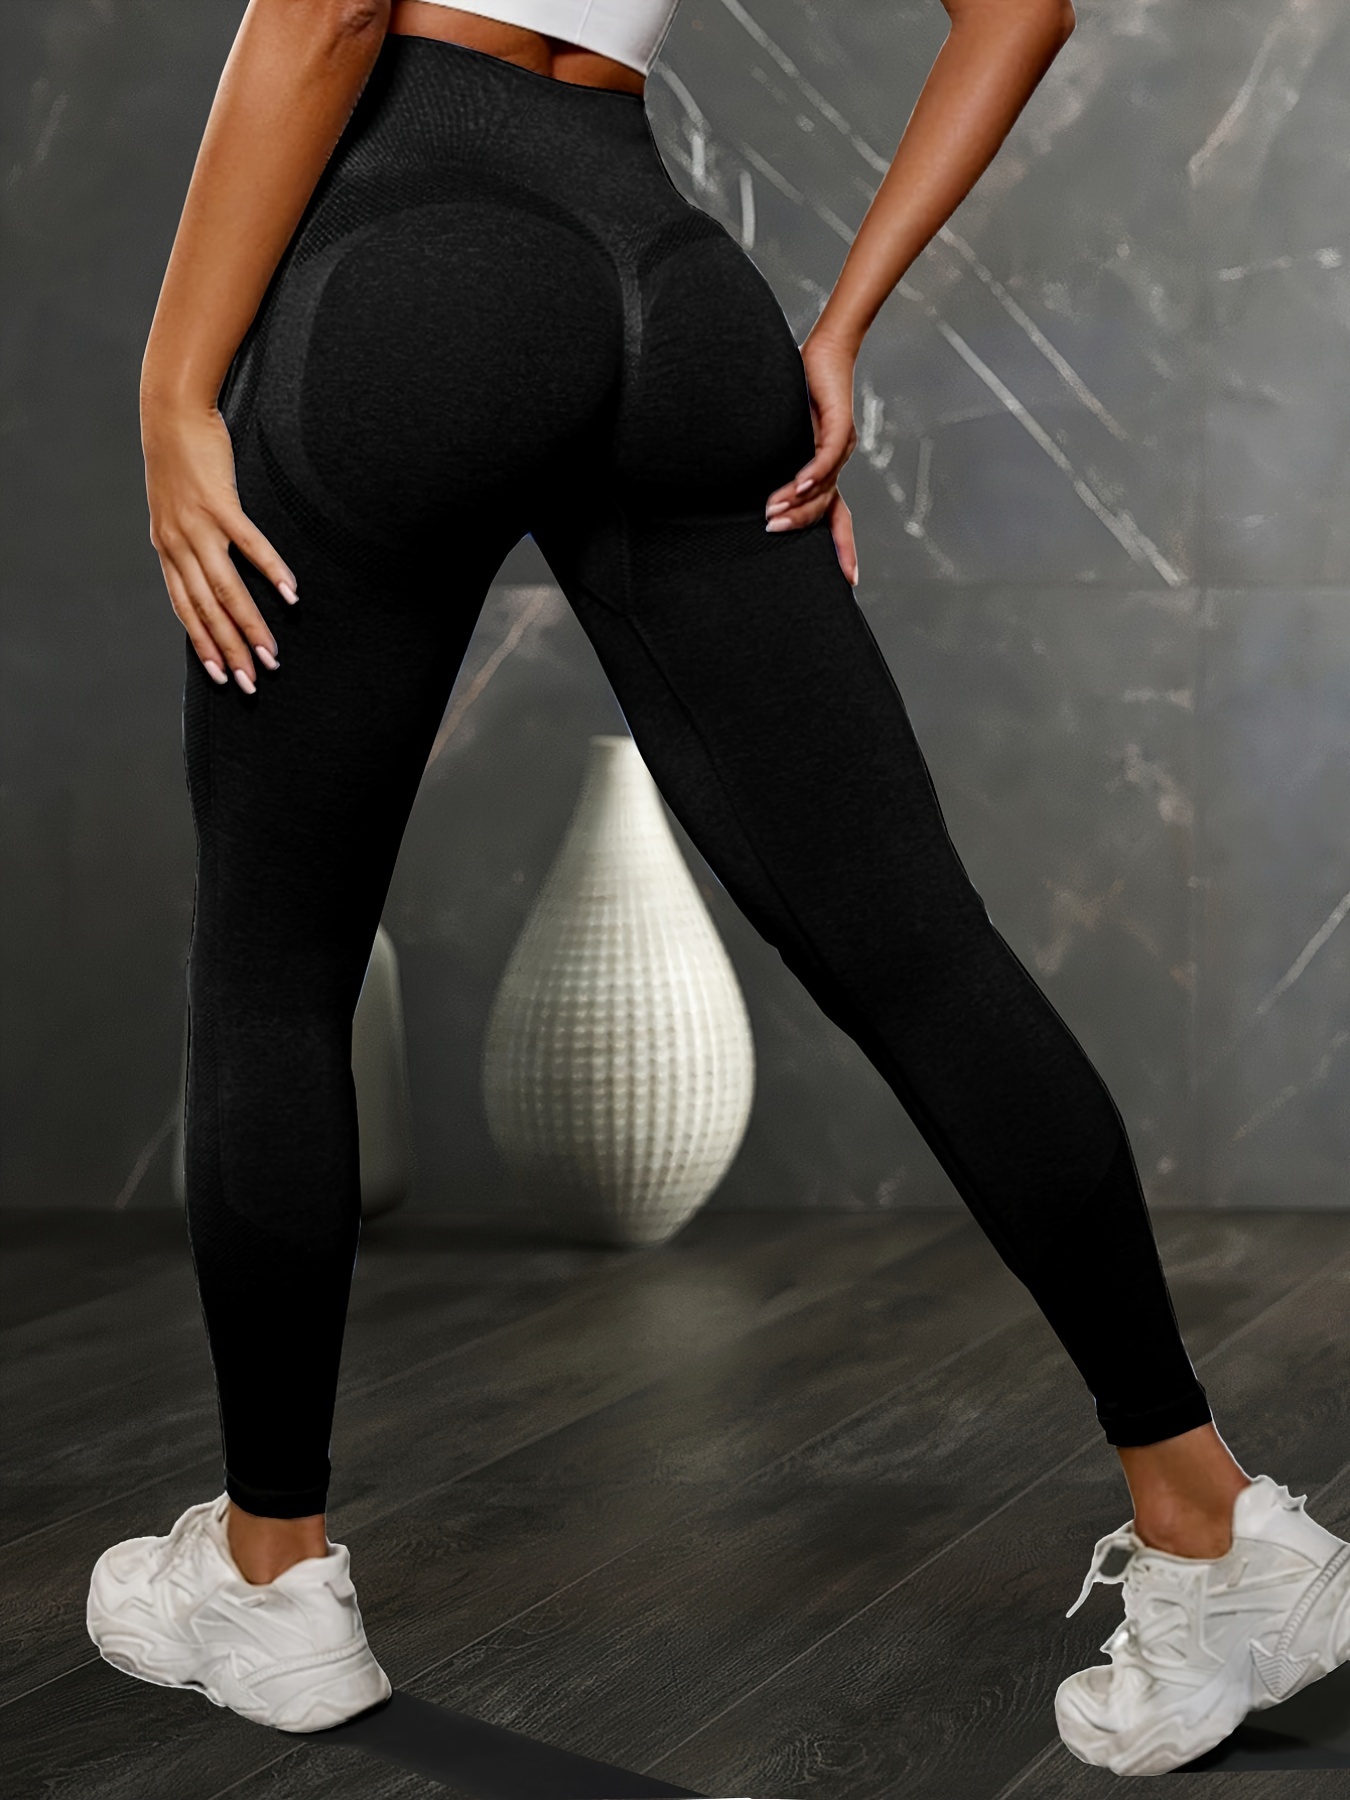 STORM LIFTING CLUB Seamless Leggings - Buttery Soft Fitness